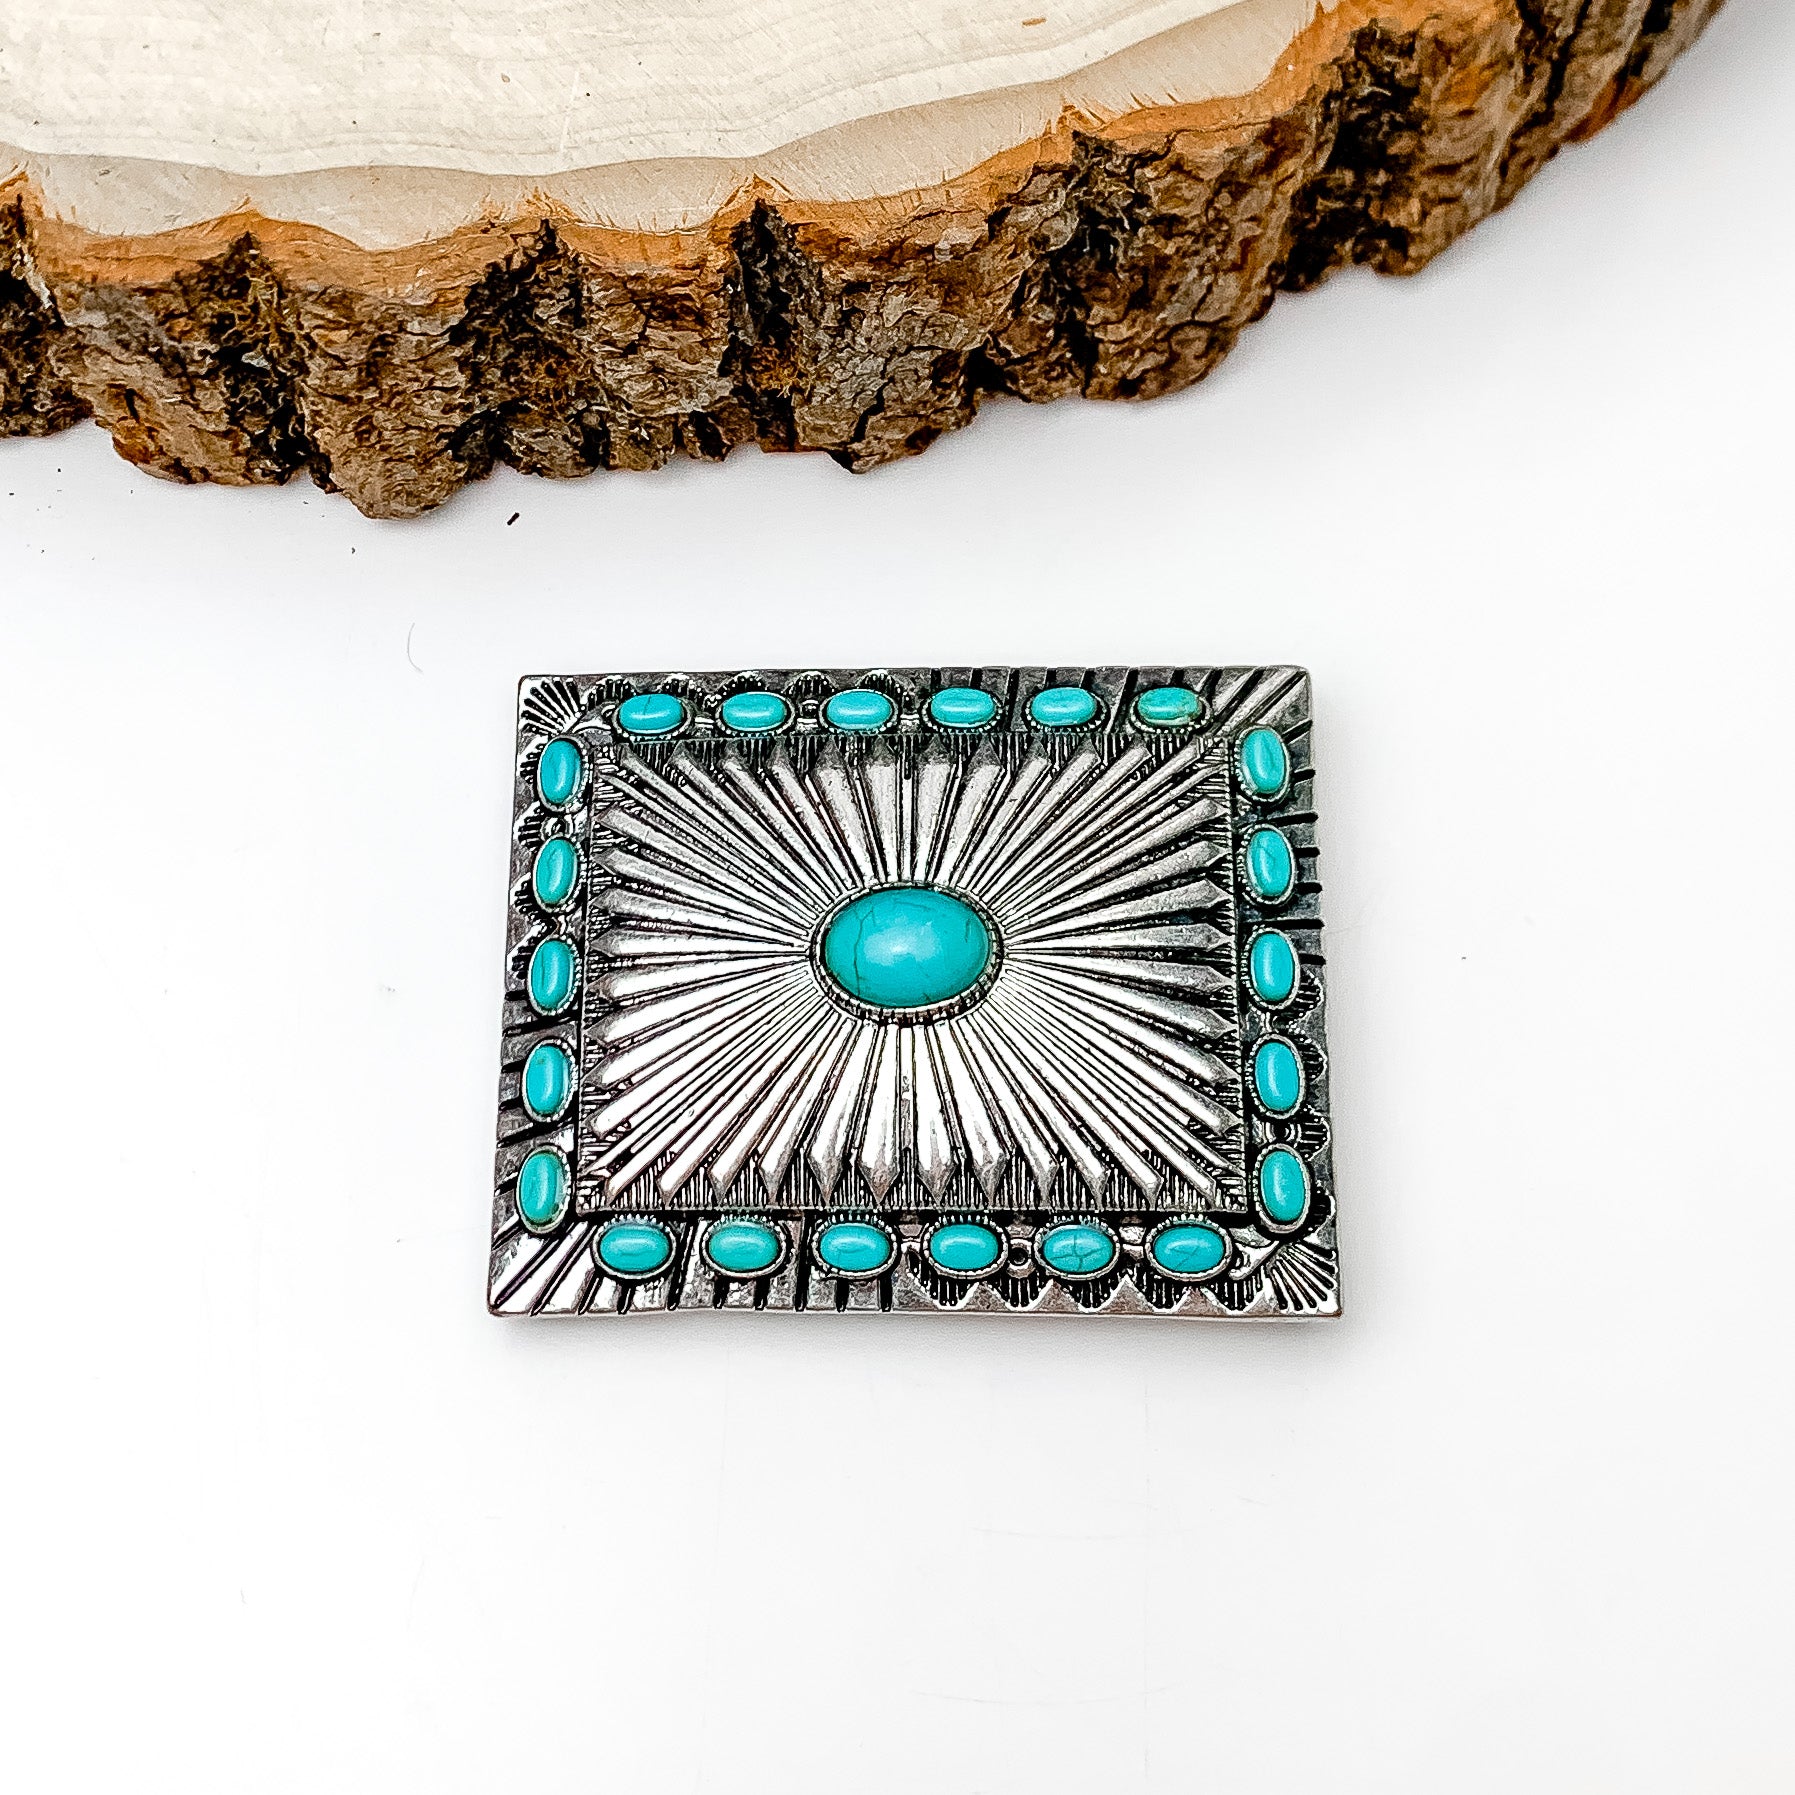 Turquoise Blue Stoned Rectangle Belt Buckle in Silver Tone. Pictured on a white background with a wood piece on the top. 